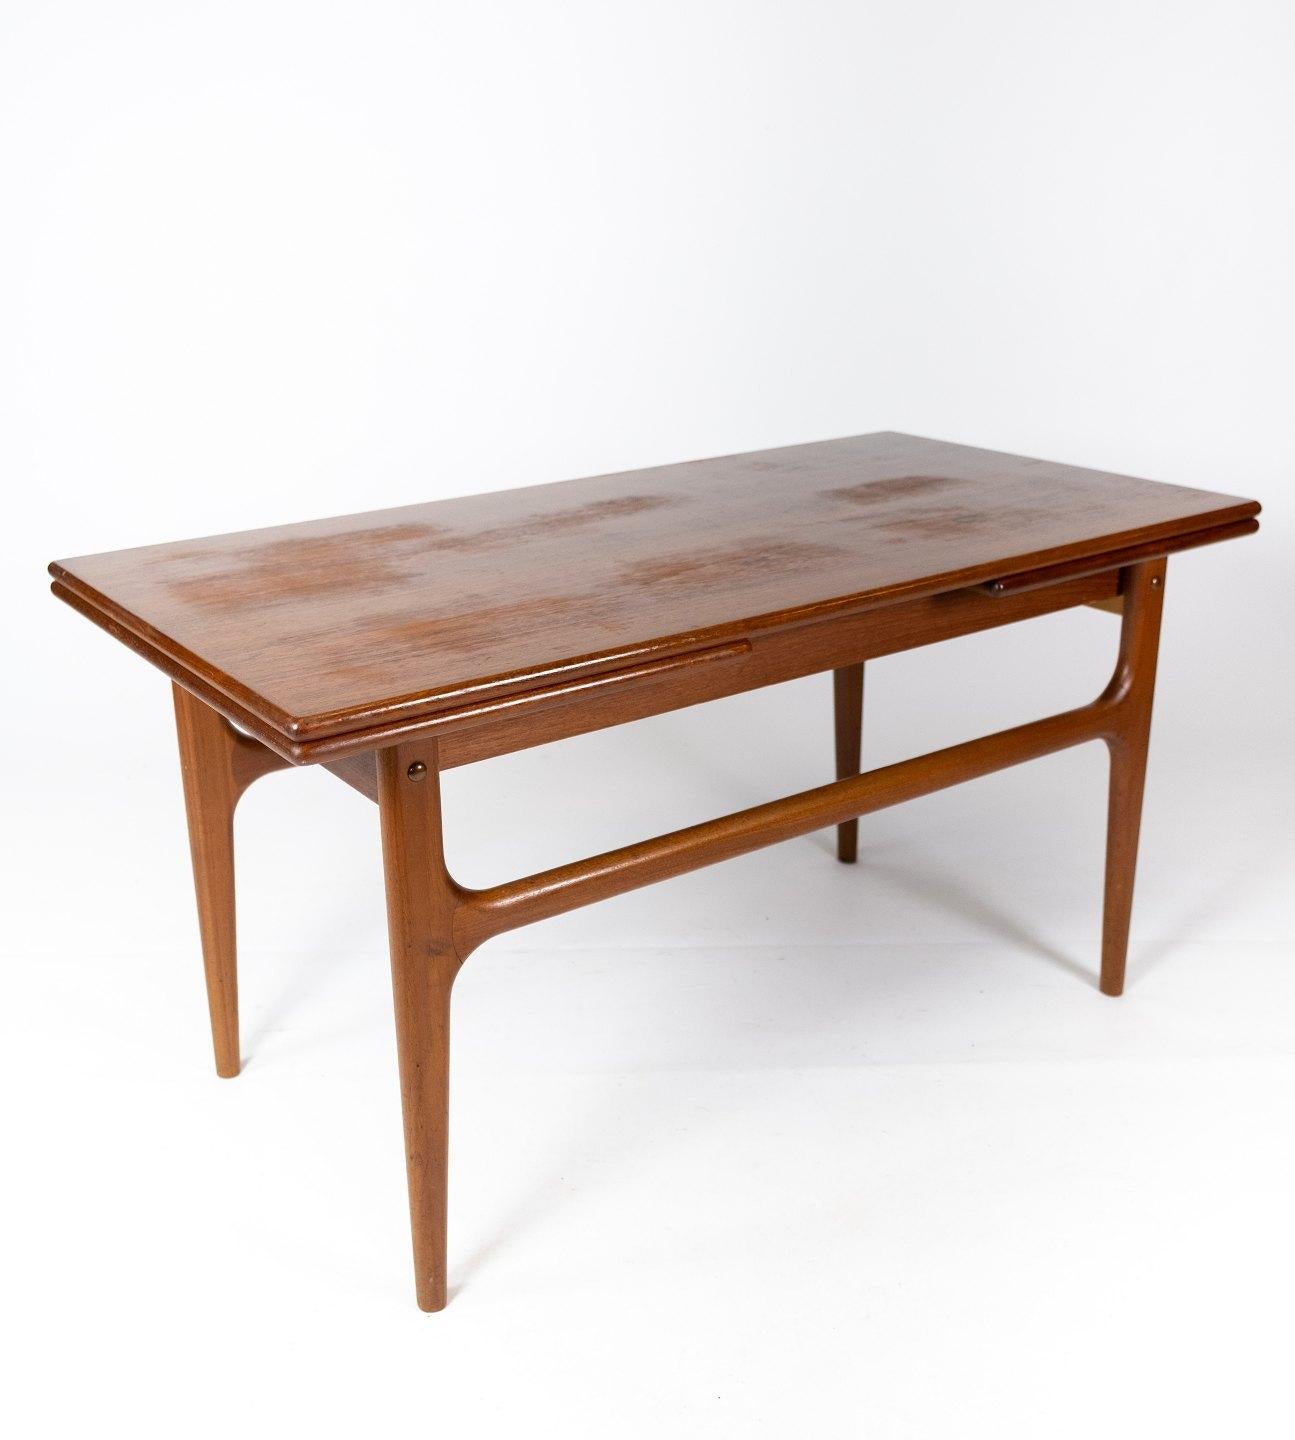 This coffee table is an excellent example of Danish design from the 1960s and combines elegance and functionality in a unique way. Made of teak wood, it exudes the warmth and natural features characteristic of this era of furniture design.

The